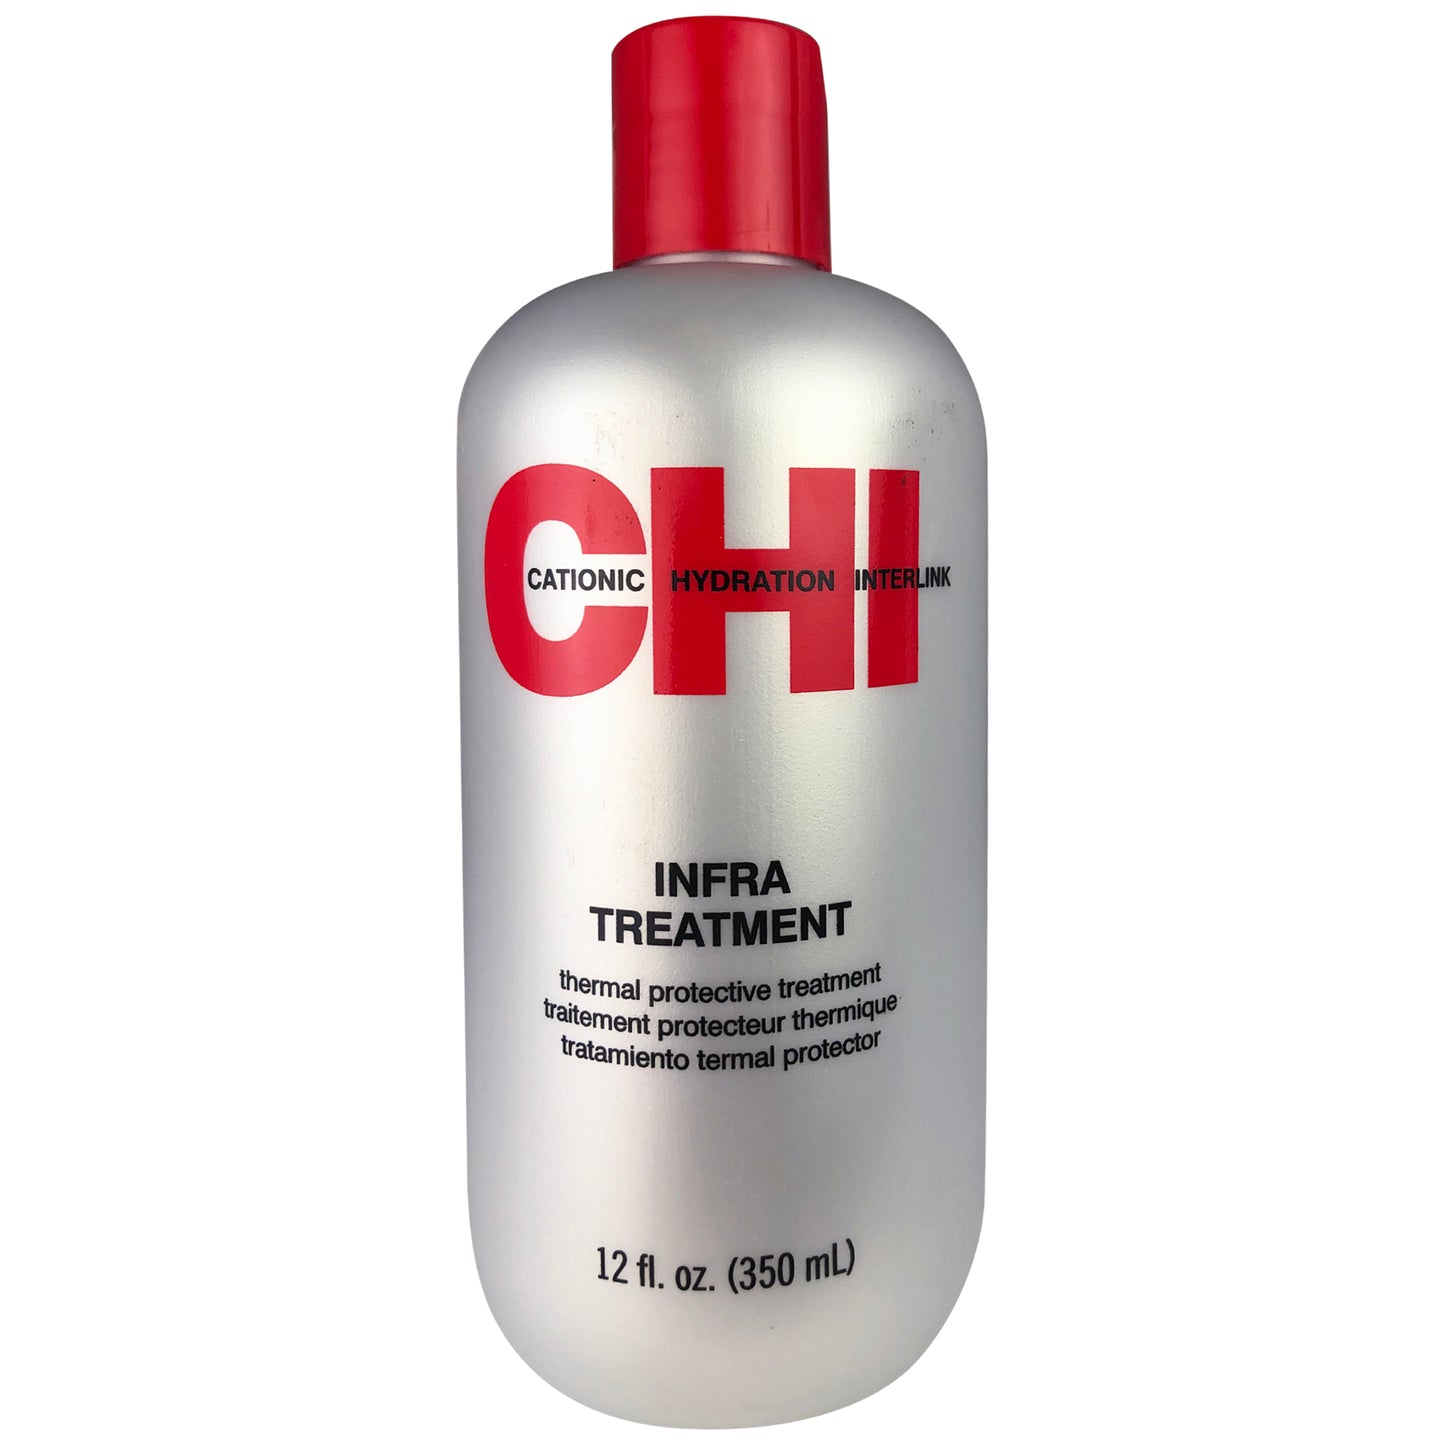 CHI Infra Treatment Thermal Protective Treatment